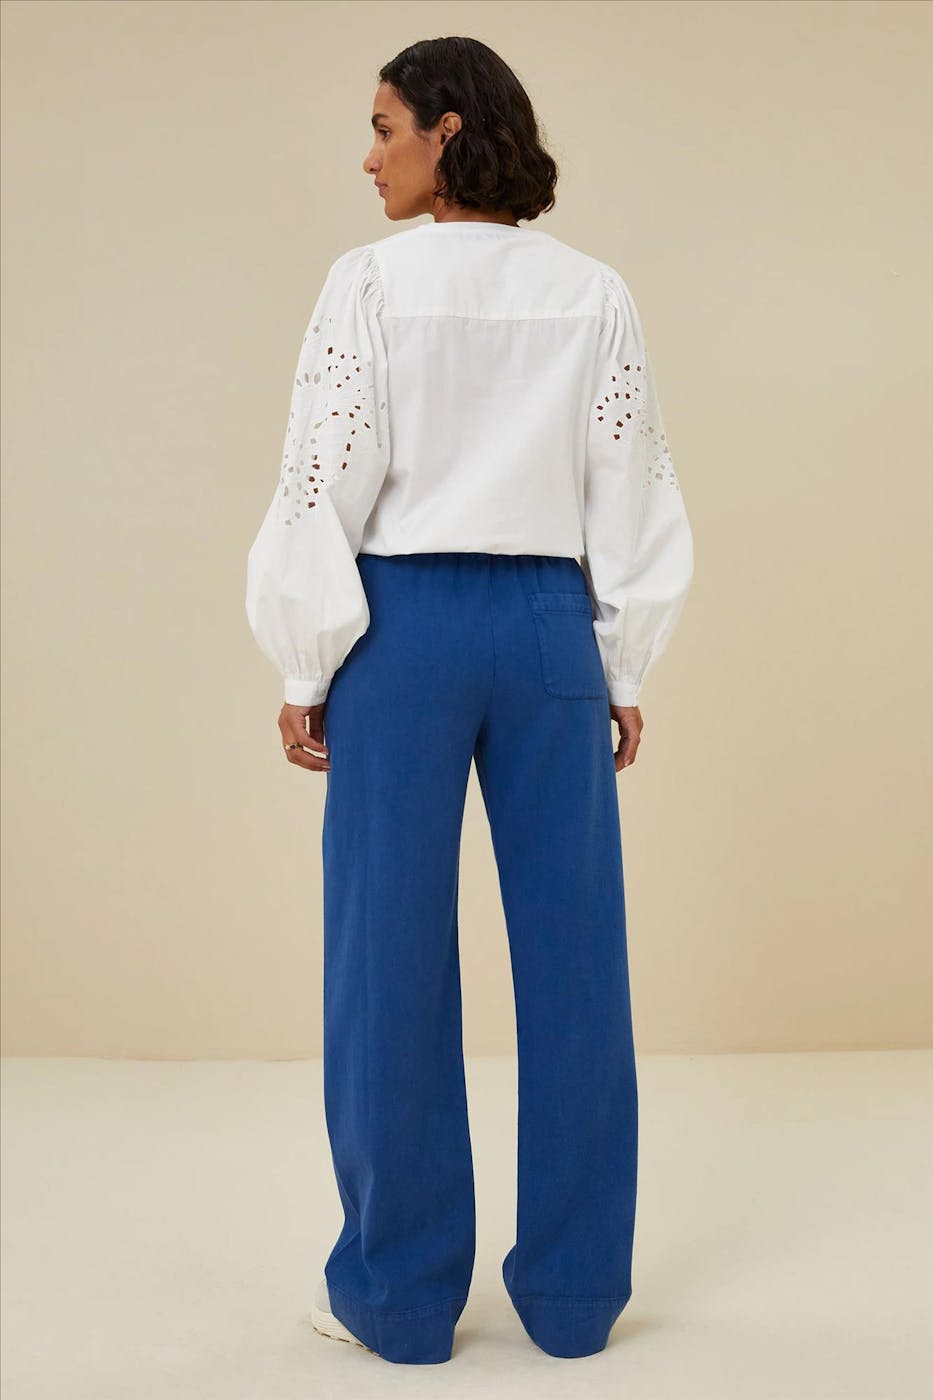 BY BAR - Witte Rikki Embroidery blouse